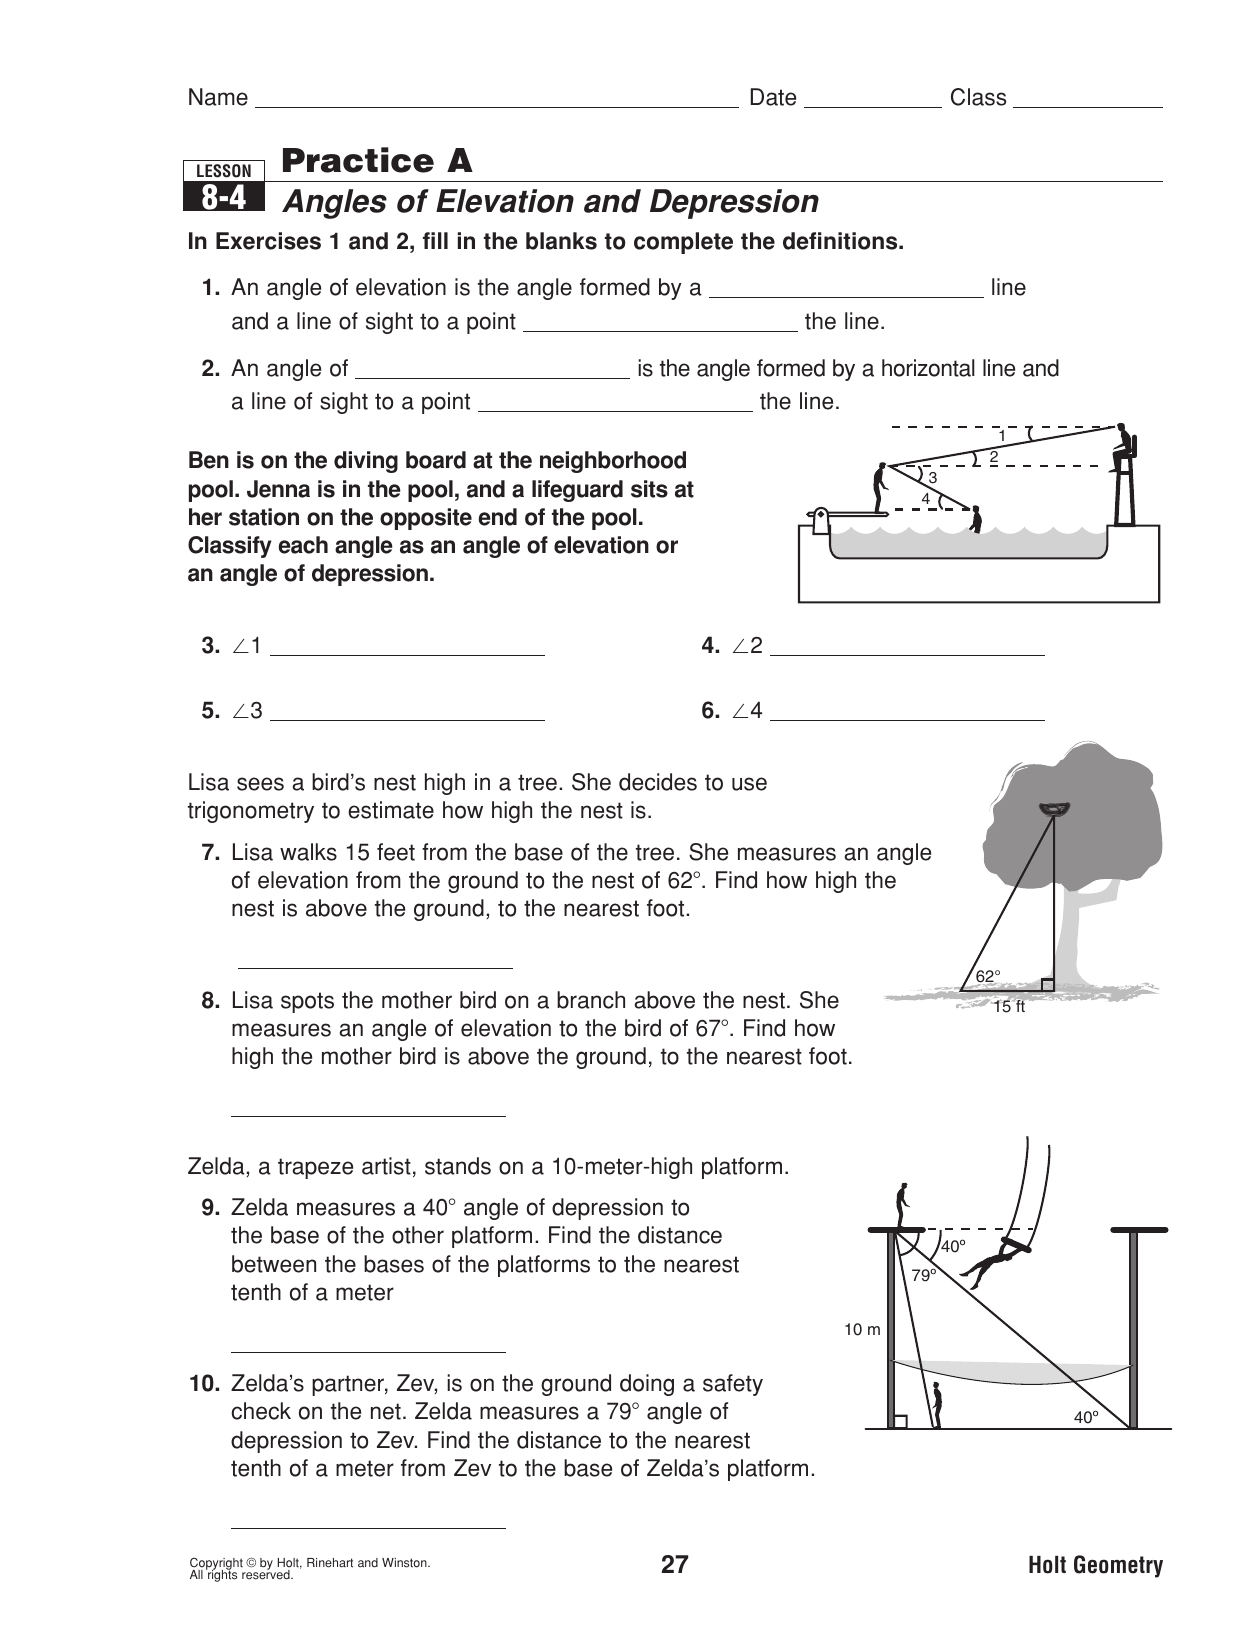 Angles Of Depression And Elevation Worksheet Answers | db-excel.com